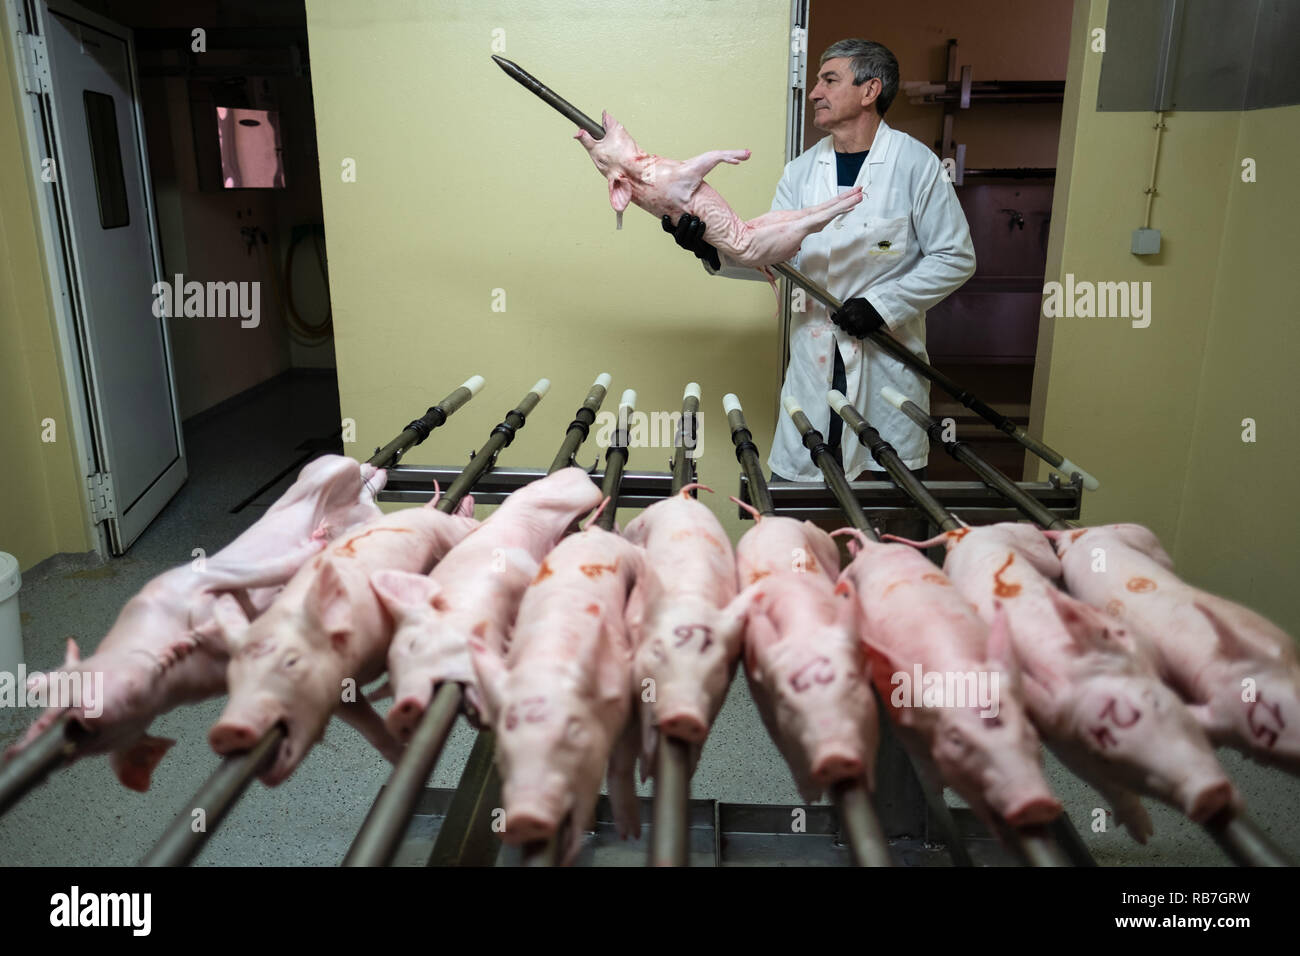 Man prepares a piglet for cooking in traditional portuguese Bairrada region's way by inserting it in a spit and into the oven, Mealhada, Portugal Stock Photo